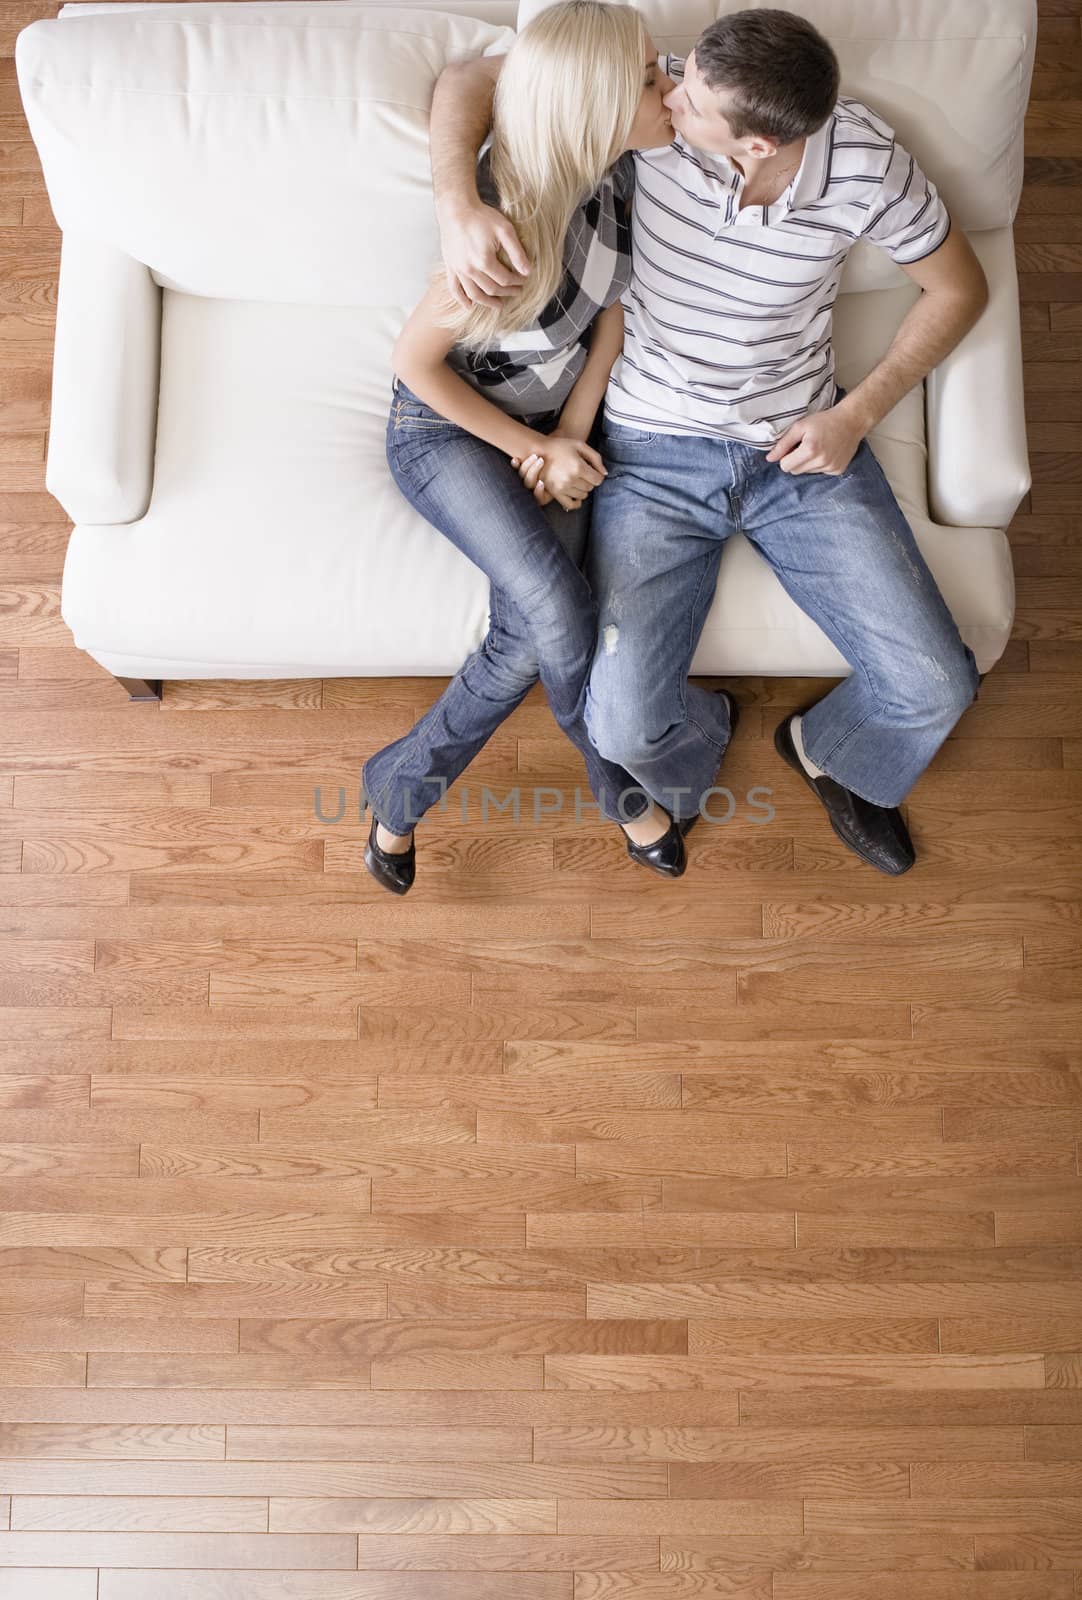 Young Couple Sitting on Love Seat Kissing by cardmaverick